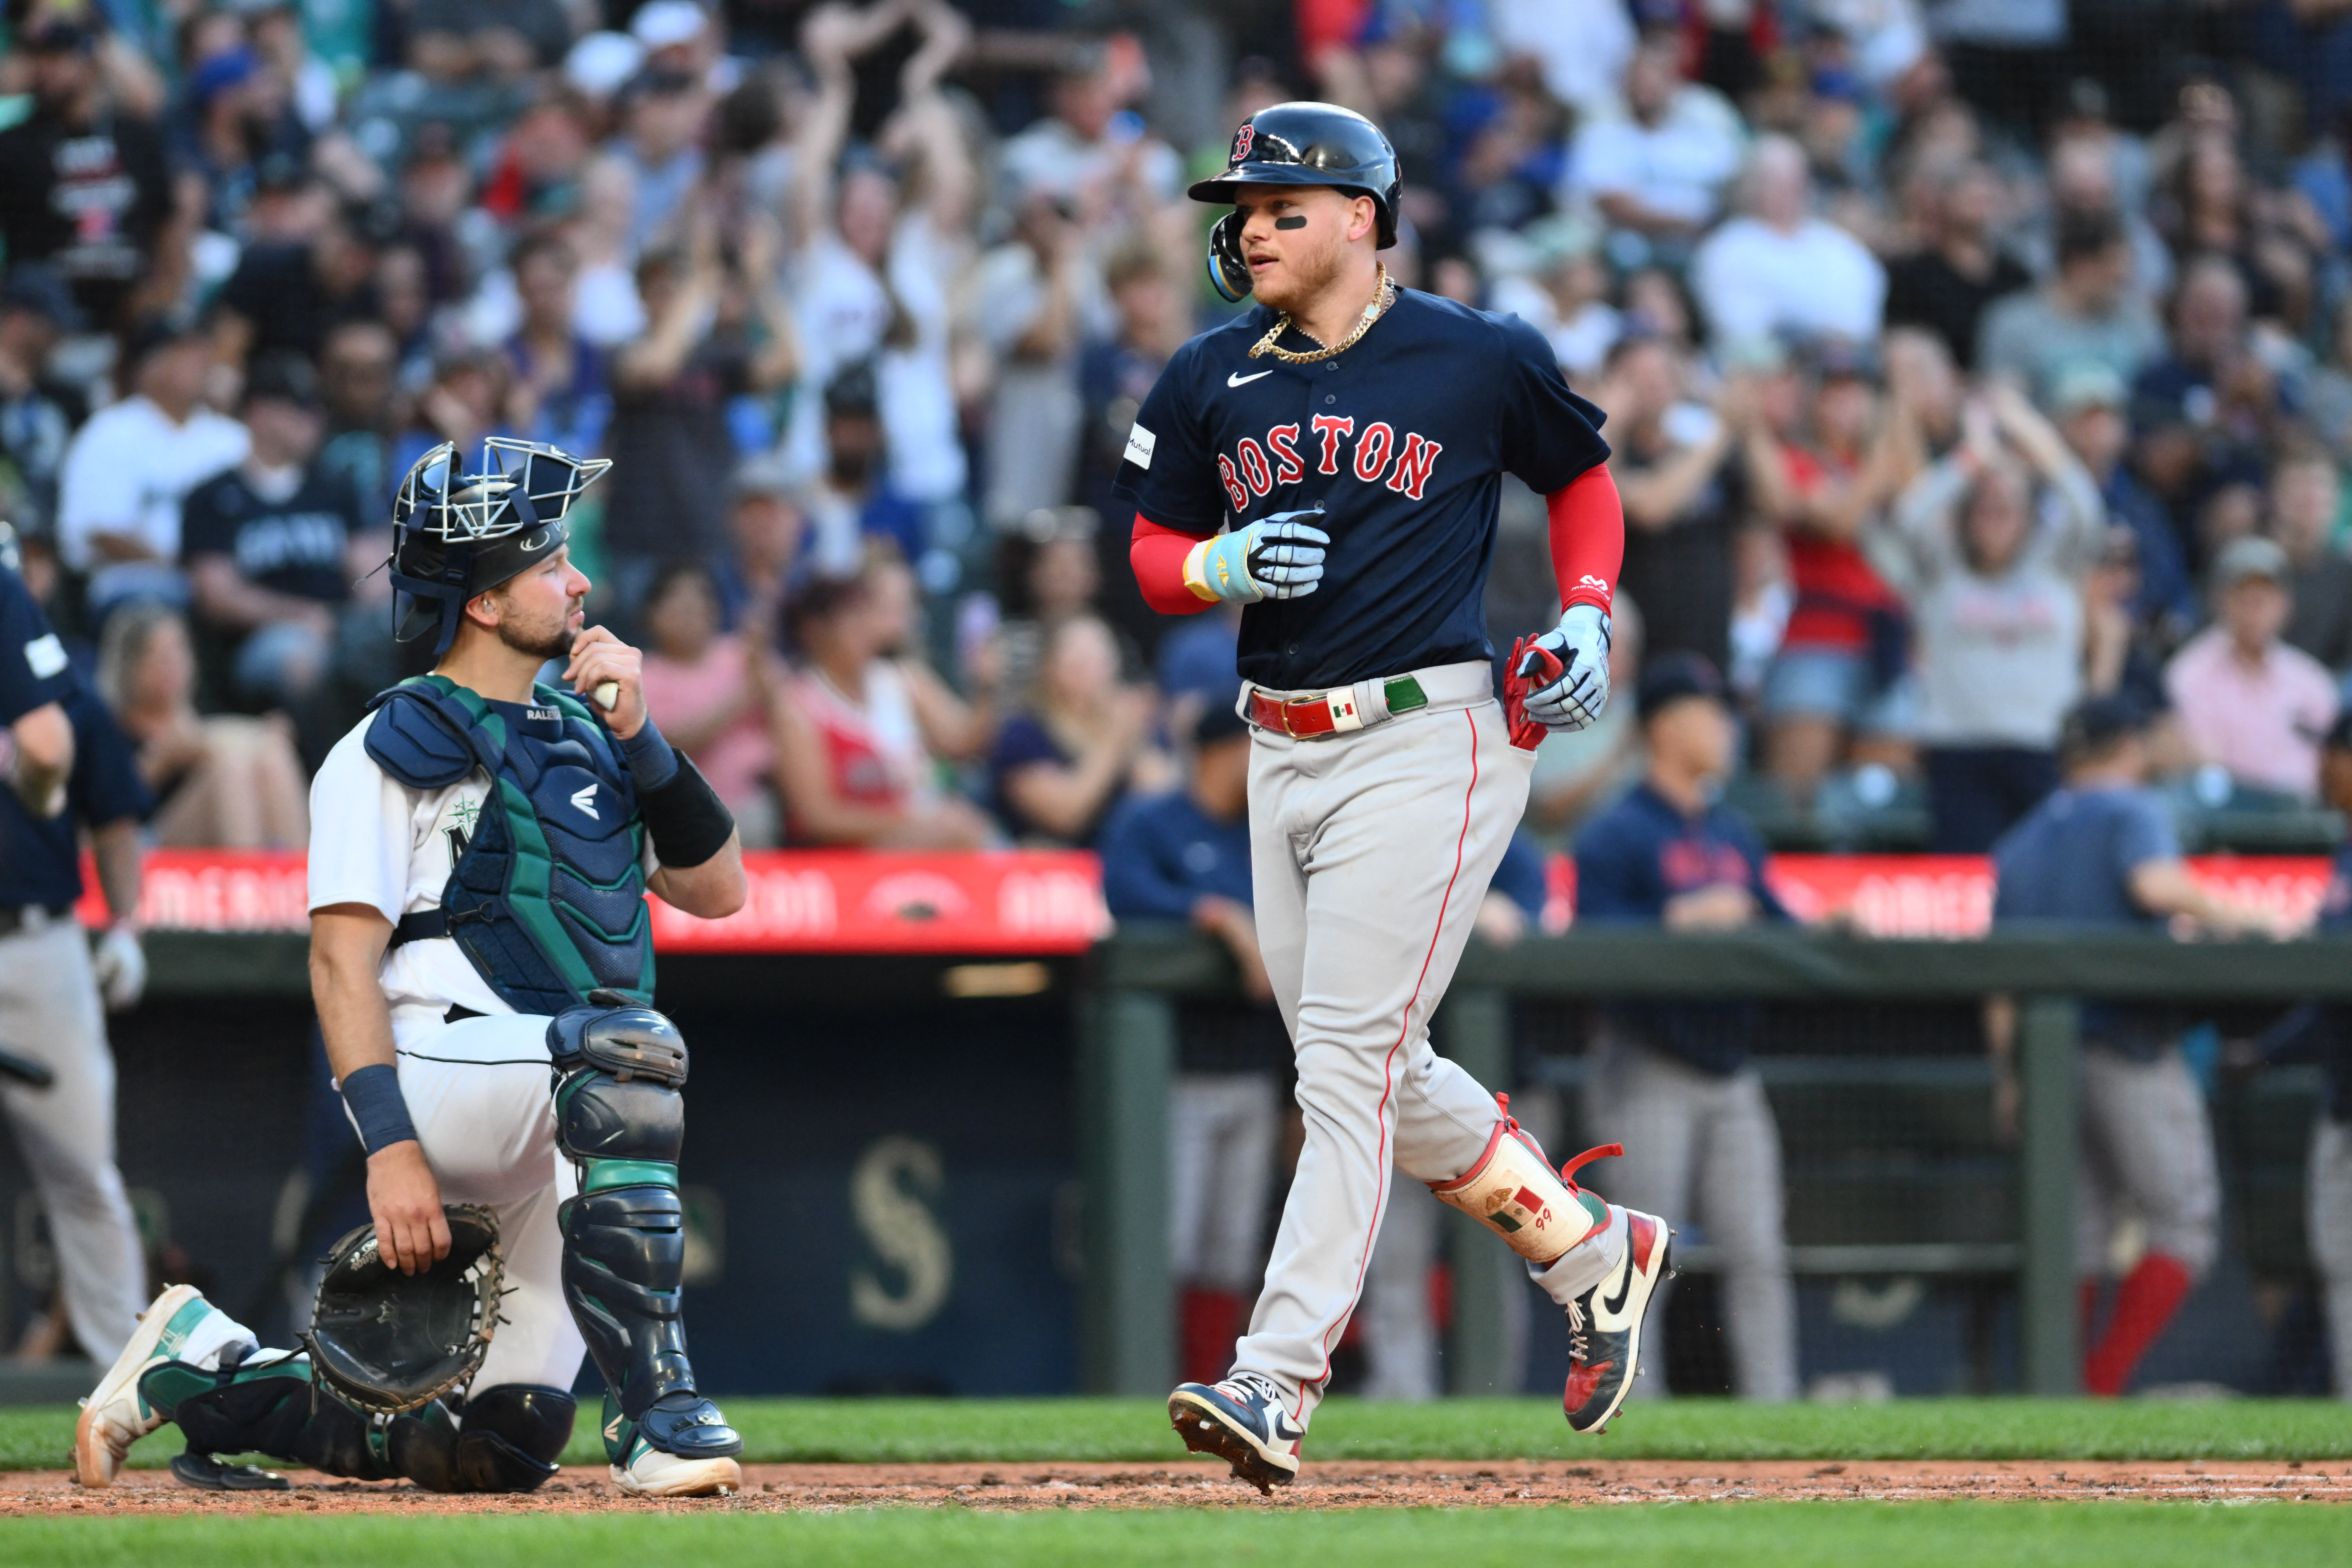 Duran shakes off rough start, helps Red Sox beat Mariners